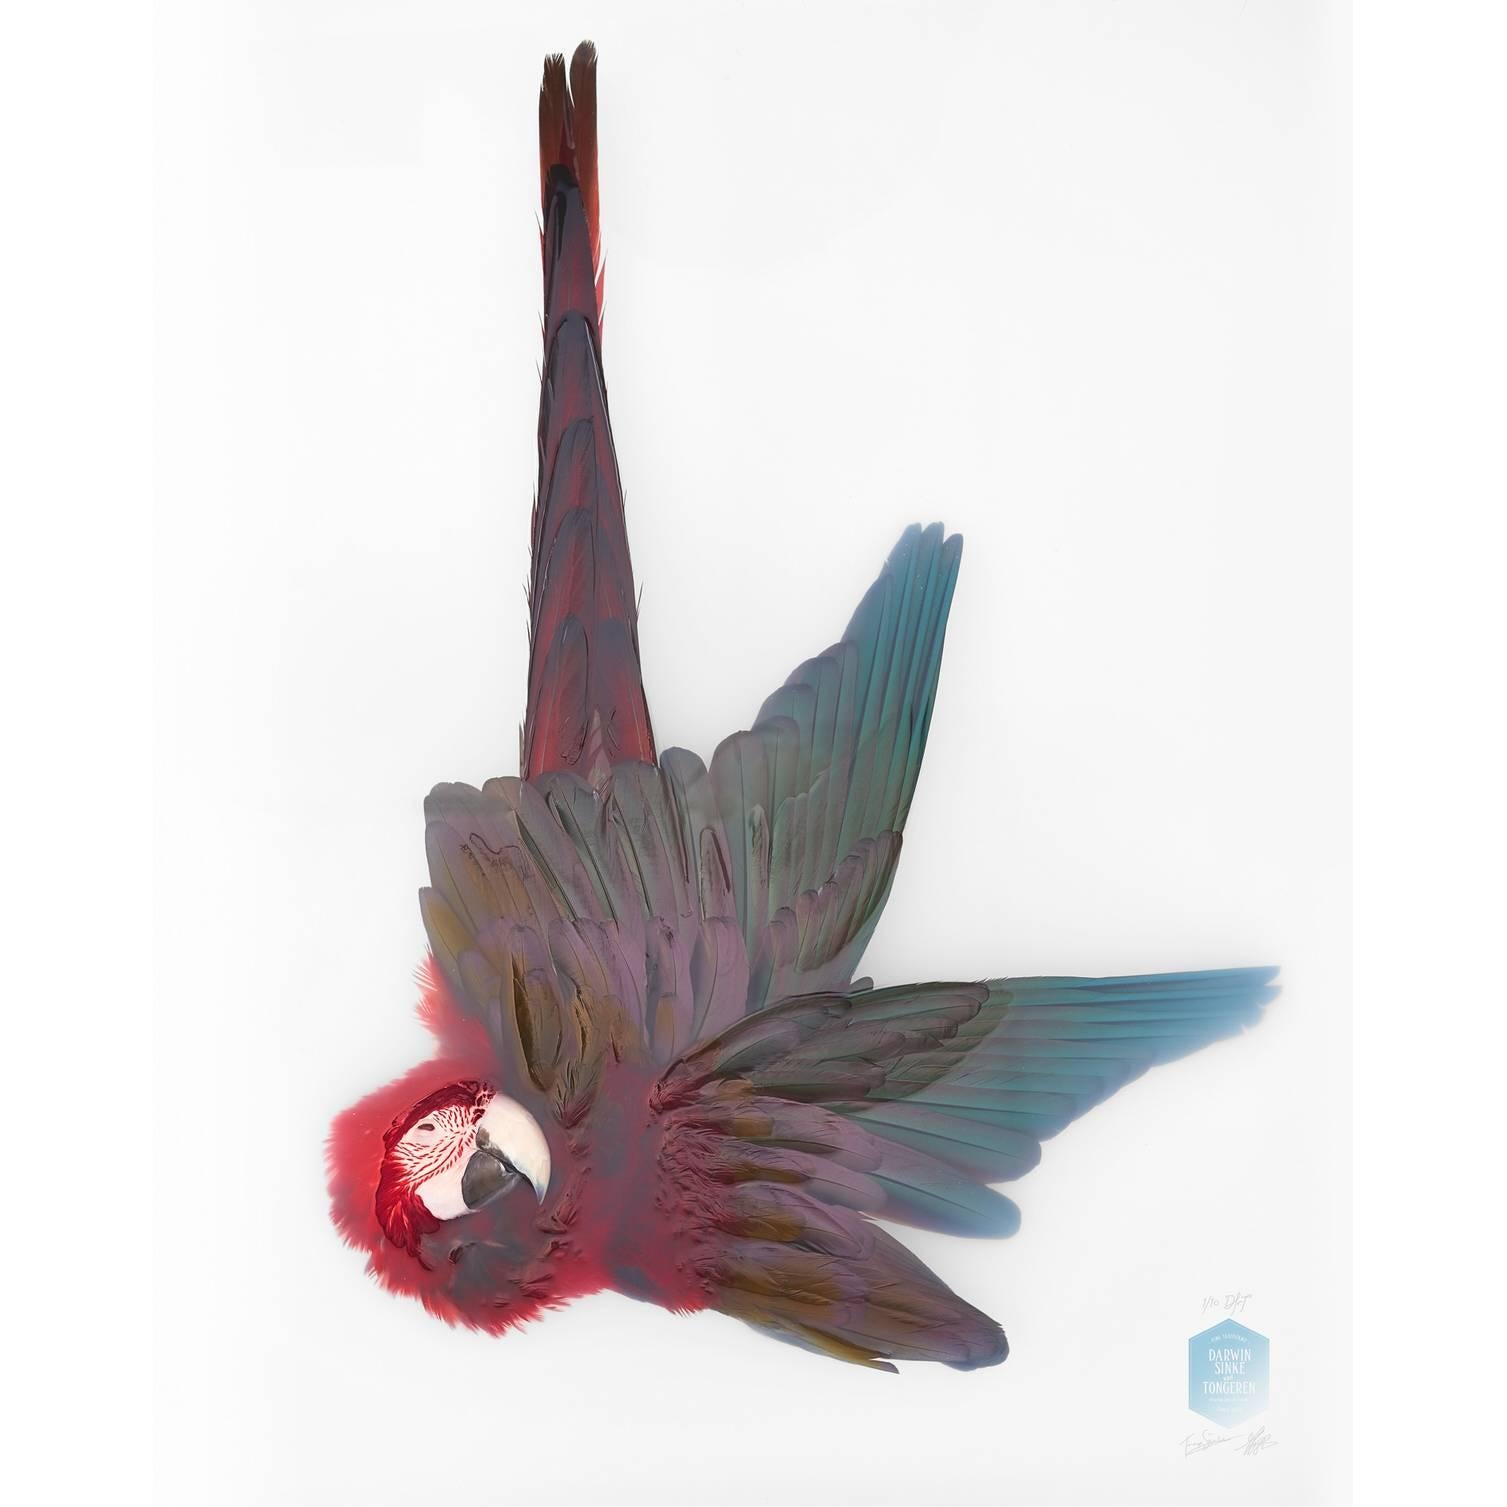 Art Print Titled 'Unknown Pose by Green-winged Macaw' by Sinke & van Tongeren For Sale